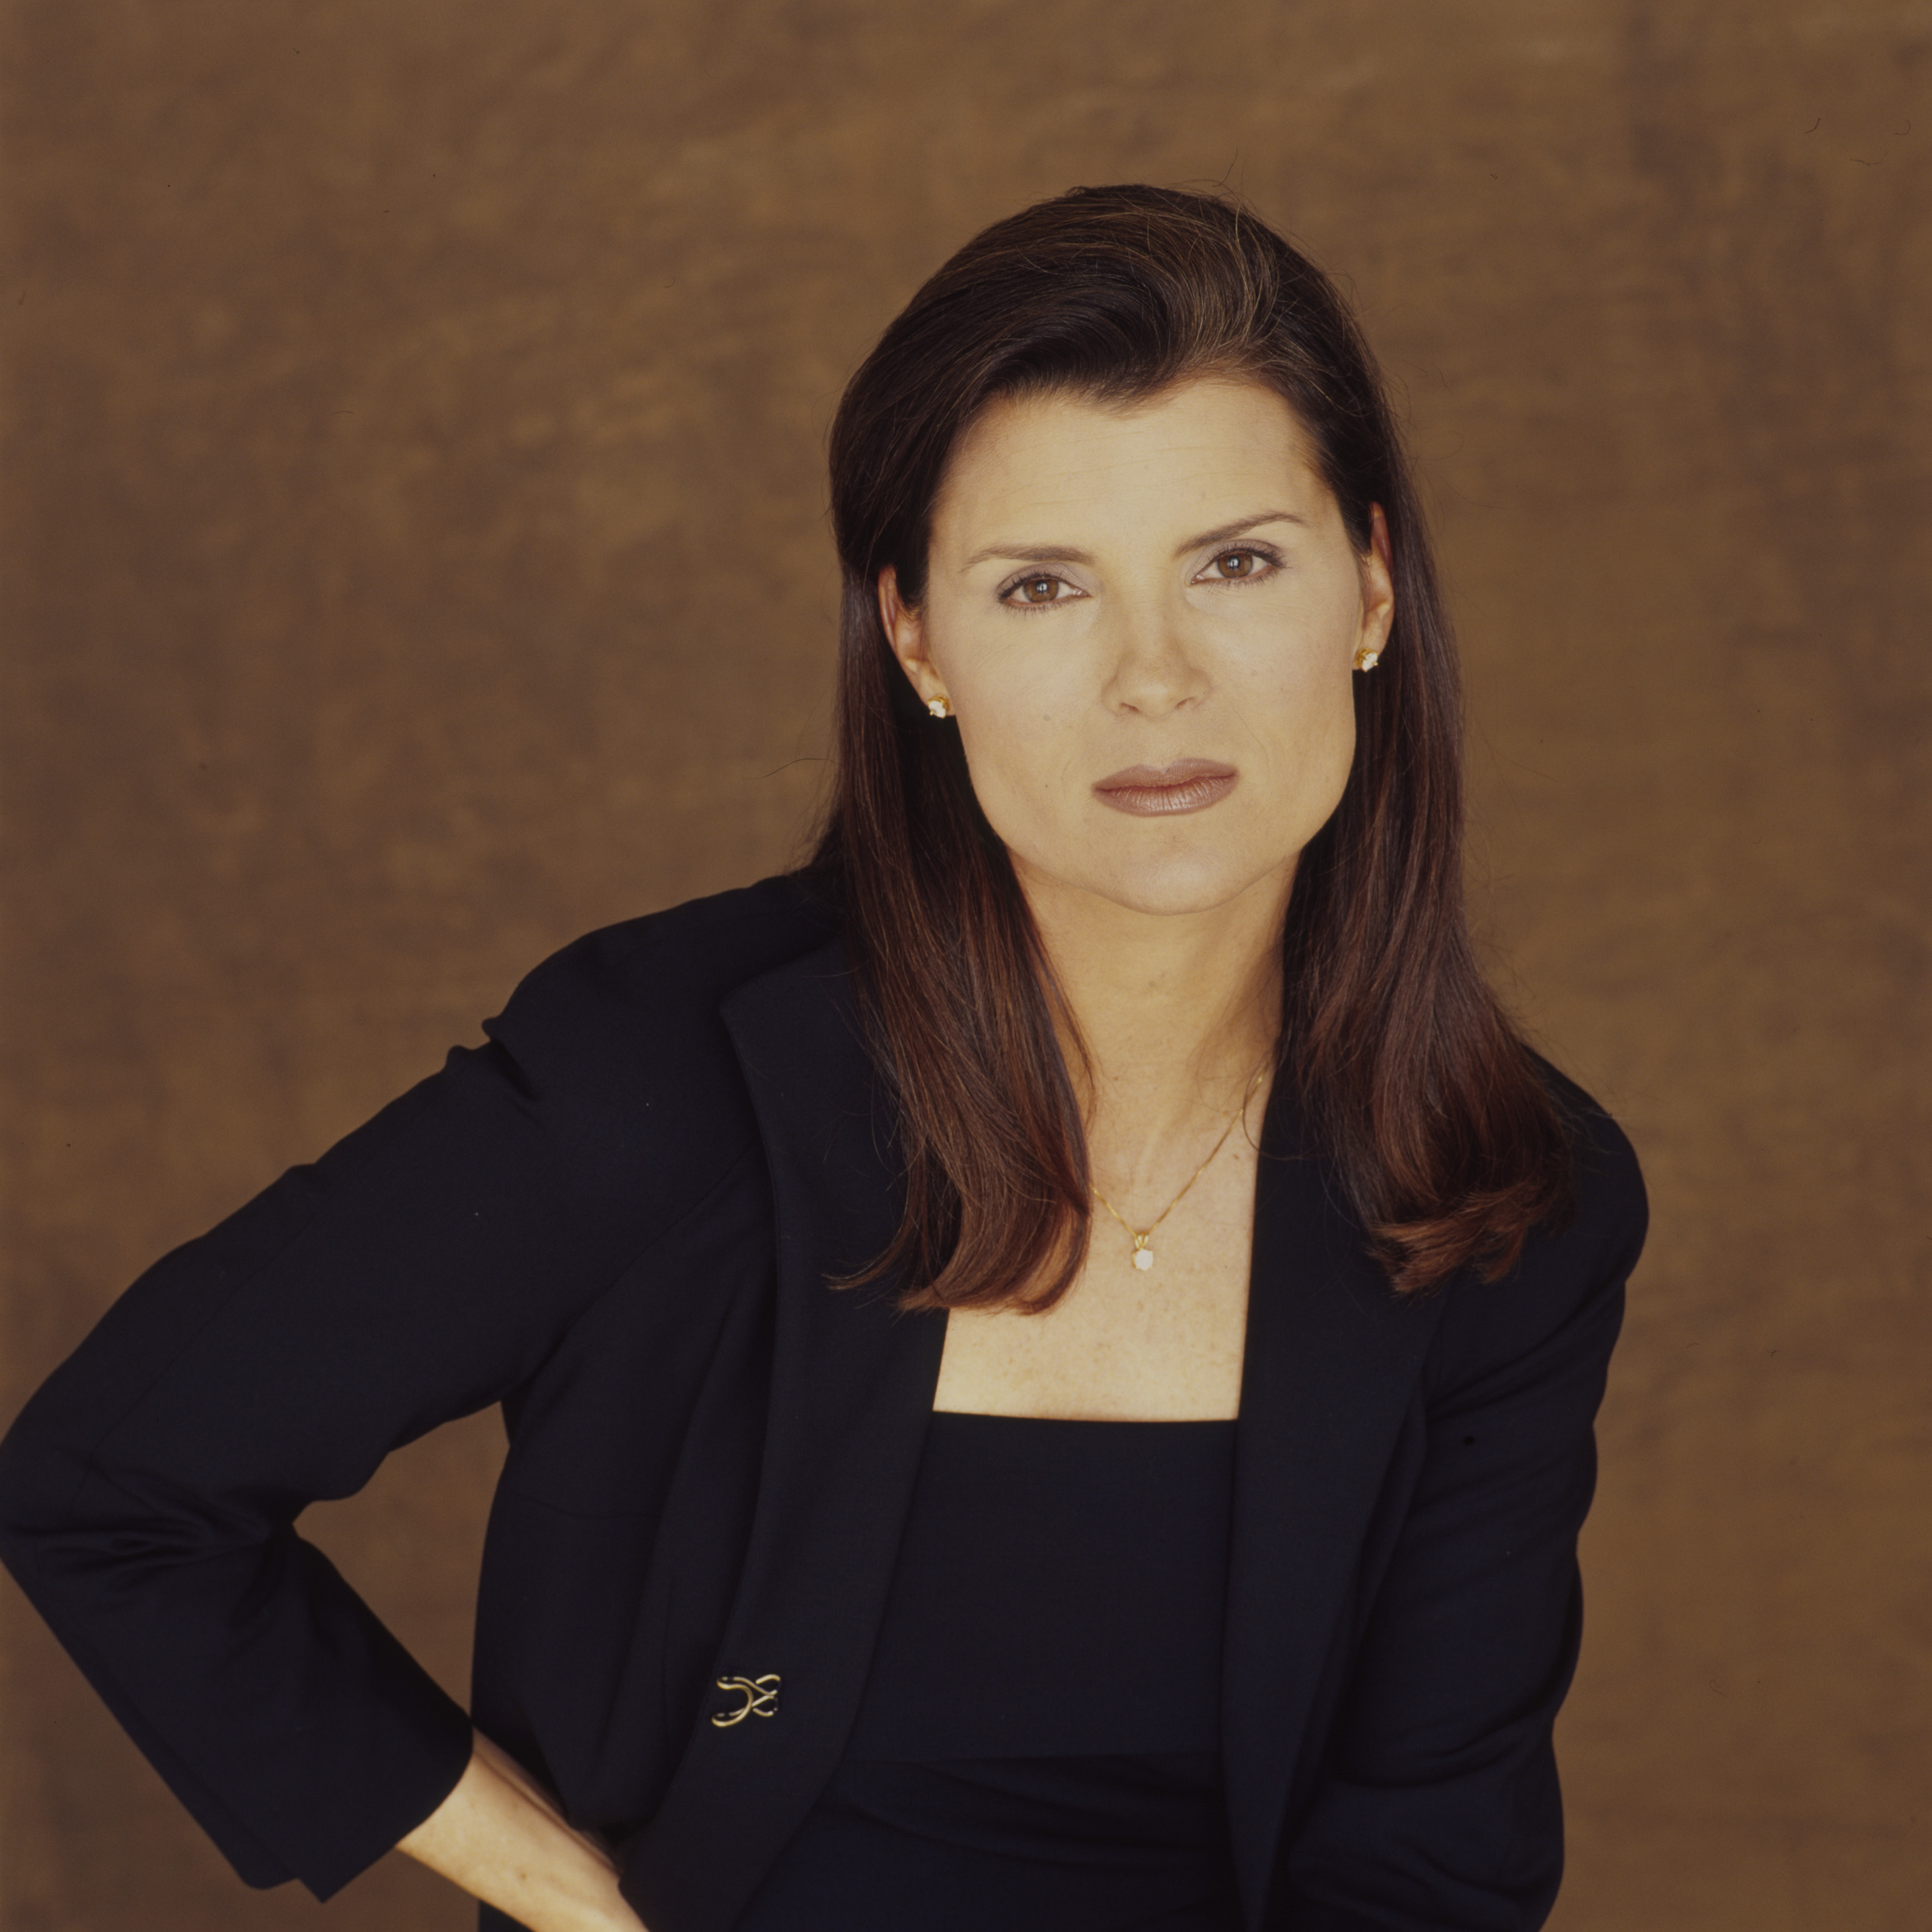 'The Bold and the Beautiful' actor Kimberlin Brown wearing a navy blue suit and standing in front of a black backdrop.